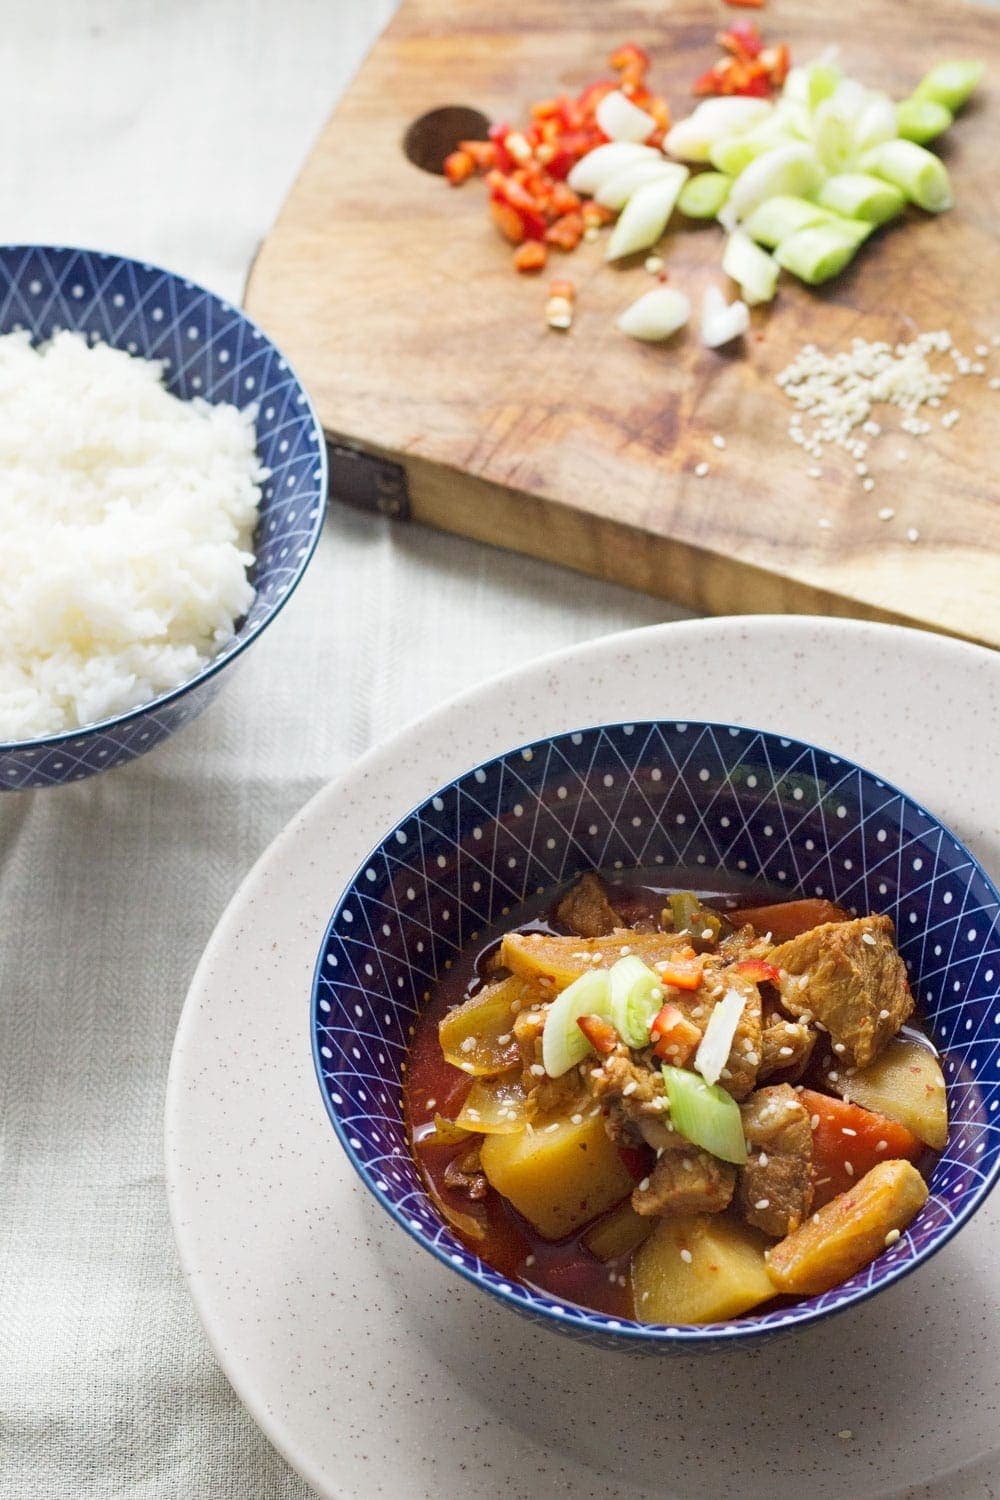 This Korean pork & potato stew is full of warm, spicy flavour. Slow cooking it makes the meat fall apart. It's the perfect winter warmer.